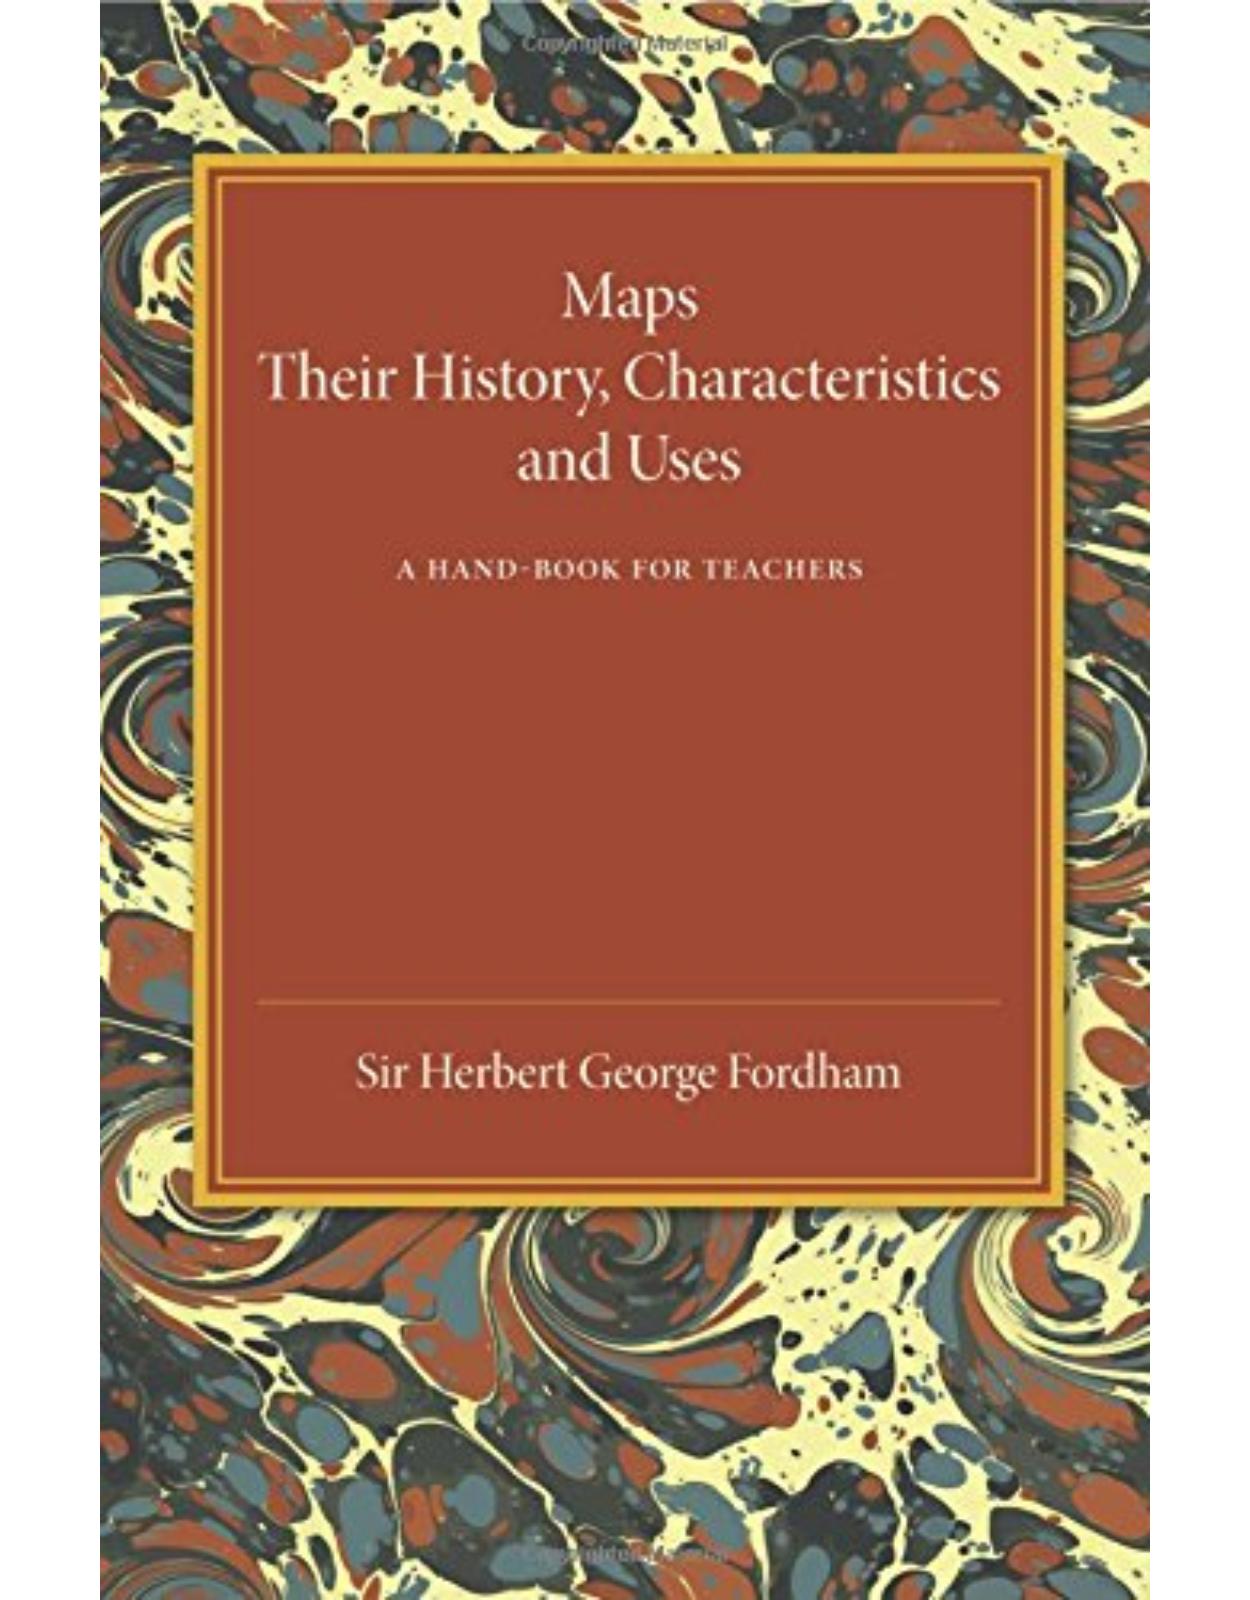 Maps: Their History, Characteristics and Uses: A Hand-book for Teachers